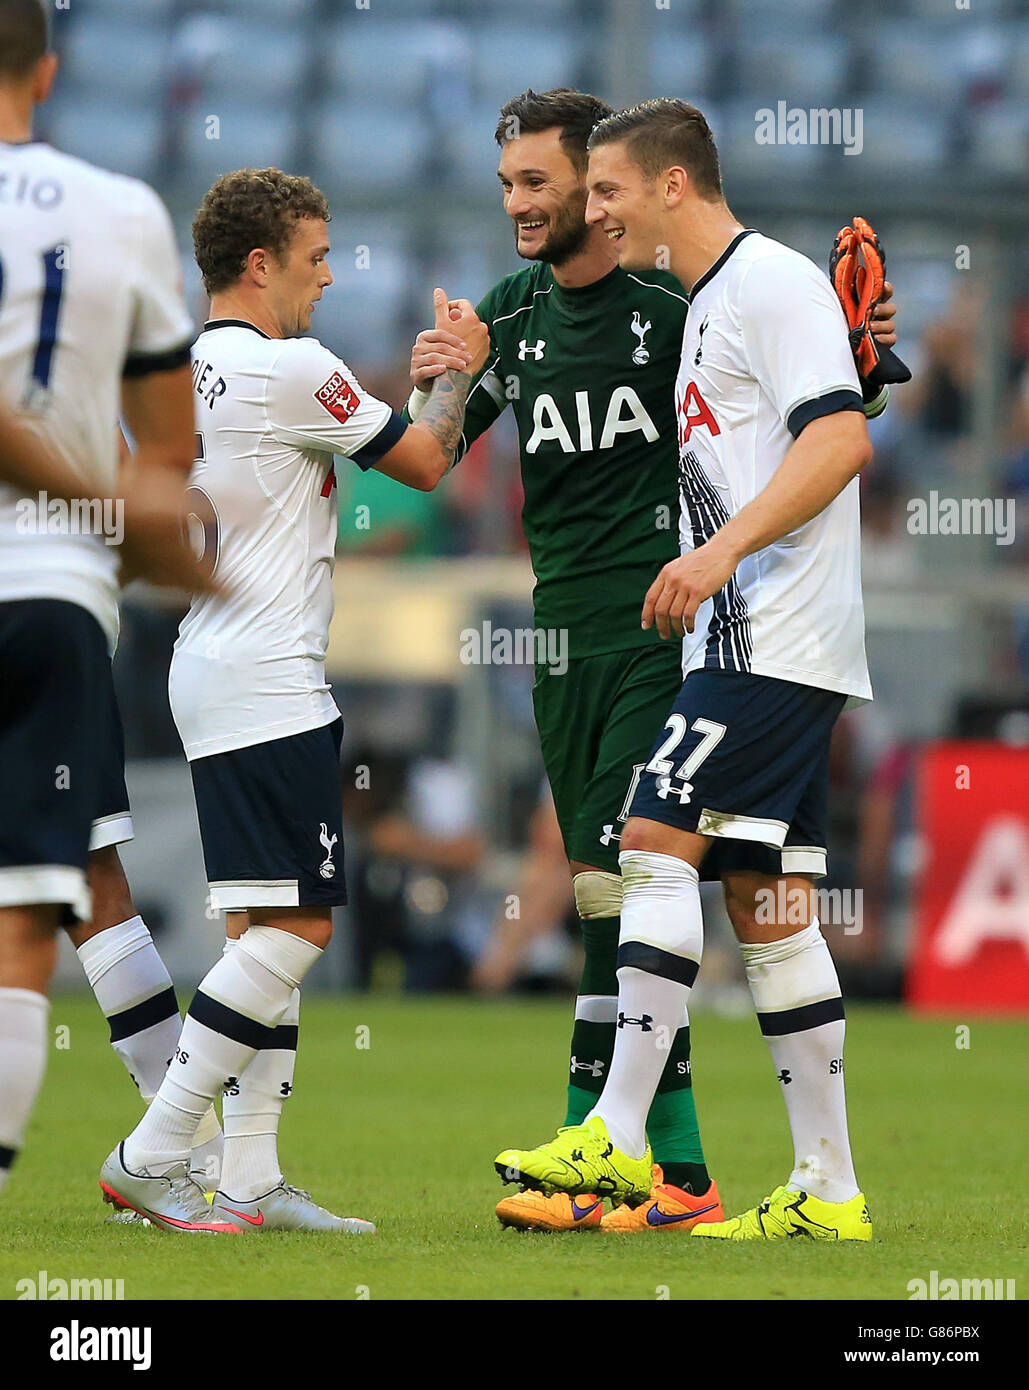 Tottenham Hotspur' goalkeeper Hugo Lloris (centre) shakes hands with team-mates Kieran Trippier (left) and Kevin Wimmer afer the game Stock Photo